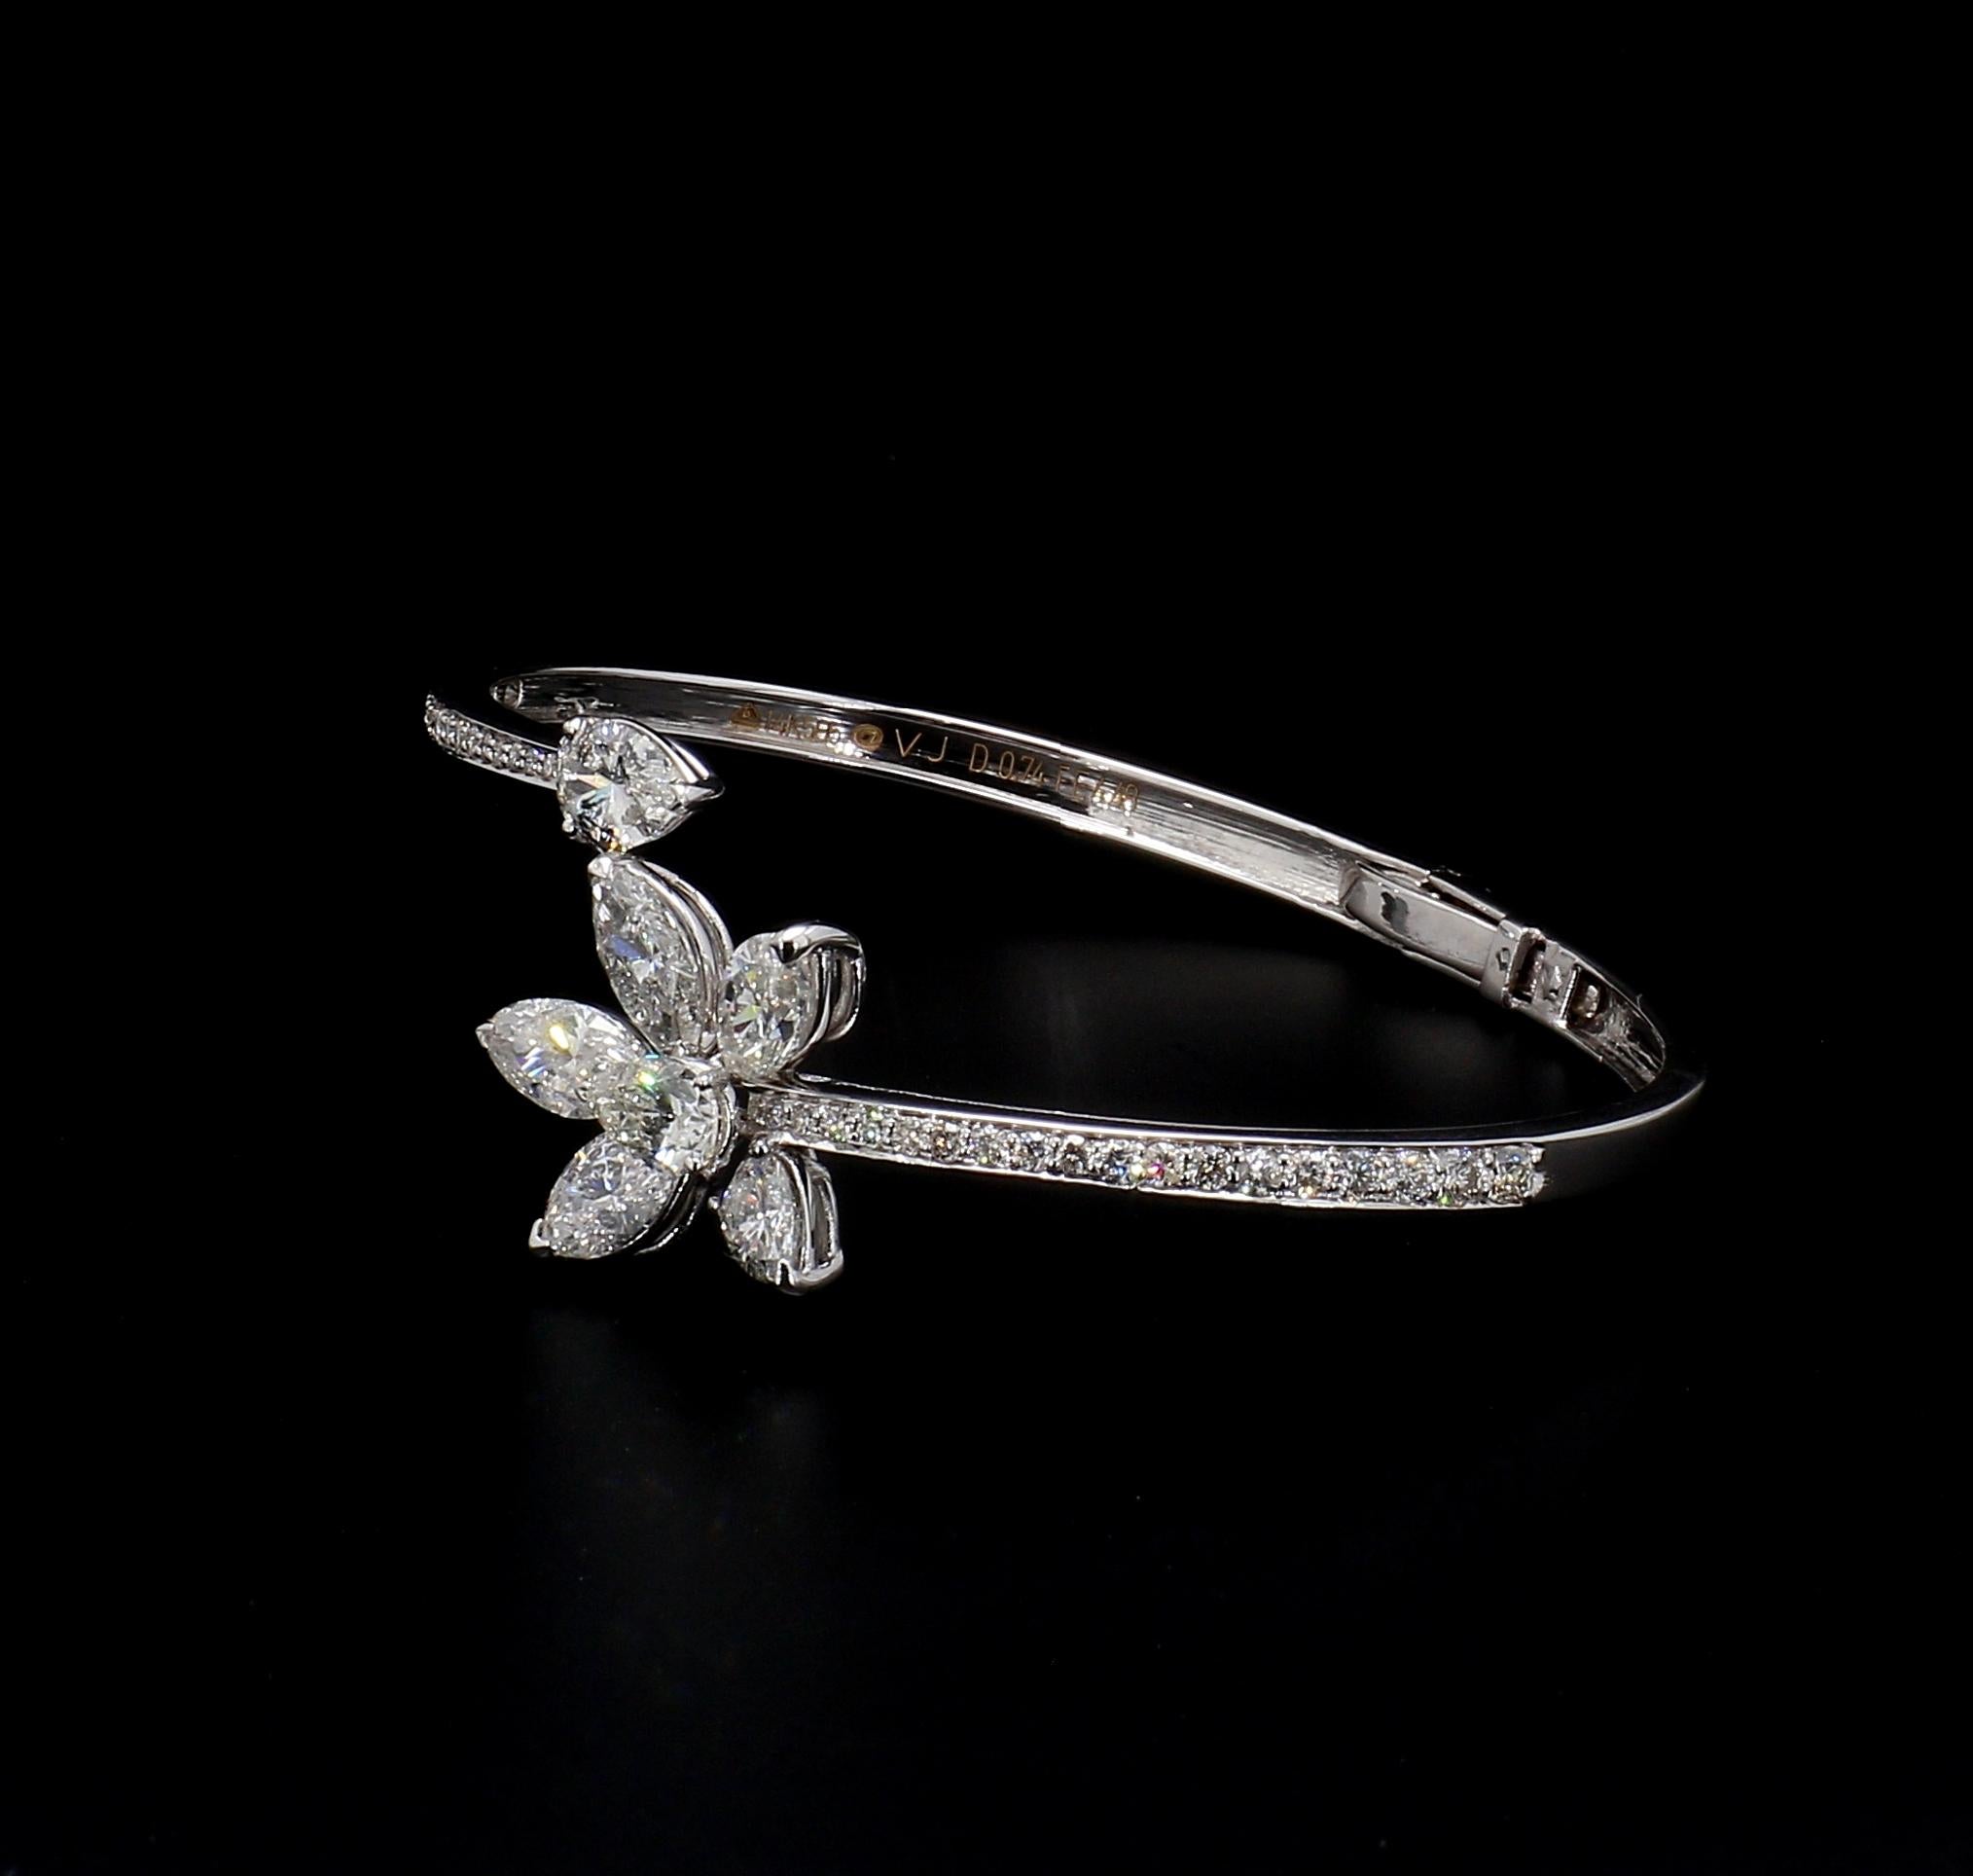 **All jewellery is one-of-a-kind, that means we have only 1 in stock**
**Hallmarked with diamond weight and gold purity** 
**Made for a 6 inched wrist, can be resized to certain limits upon request**

Introducing our stunning floral bangle, crafted